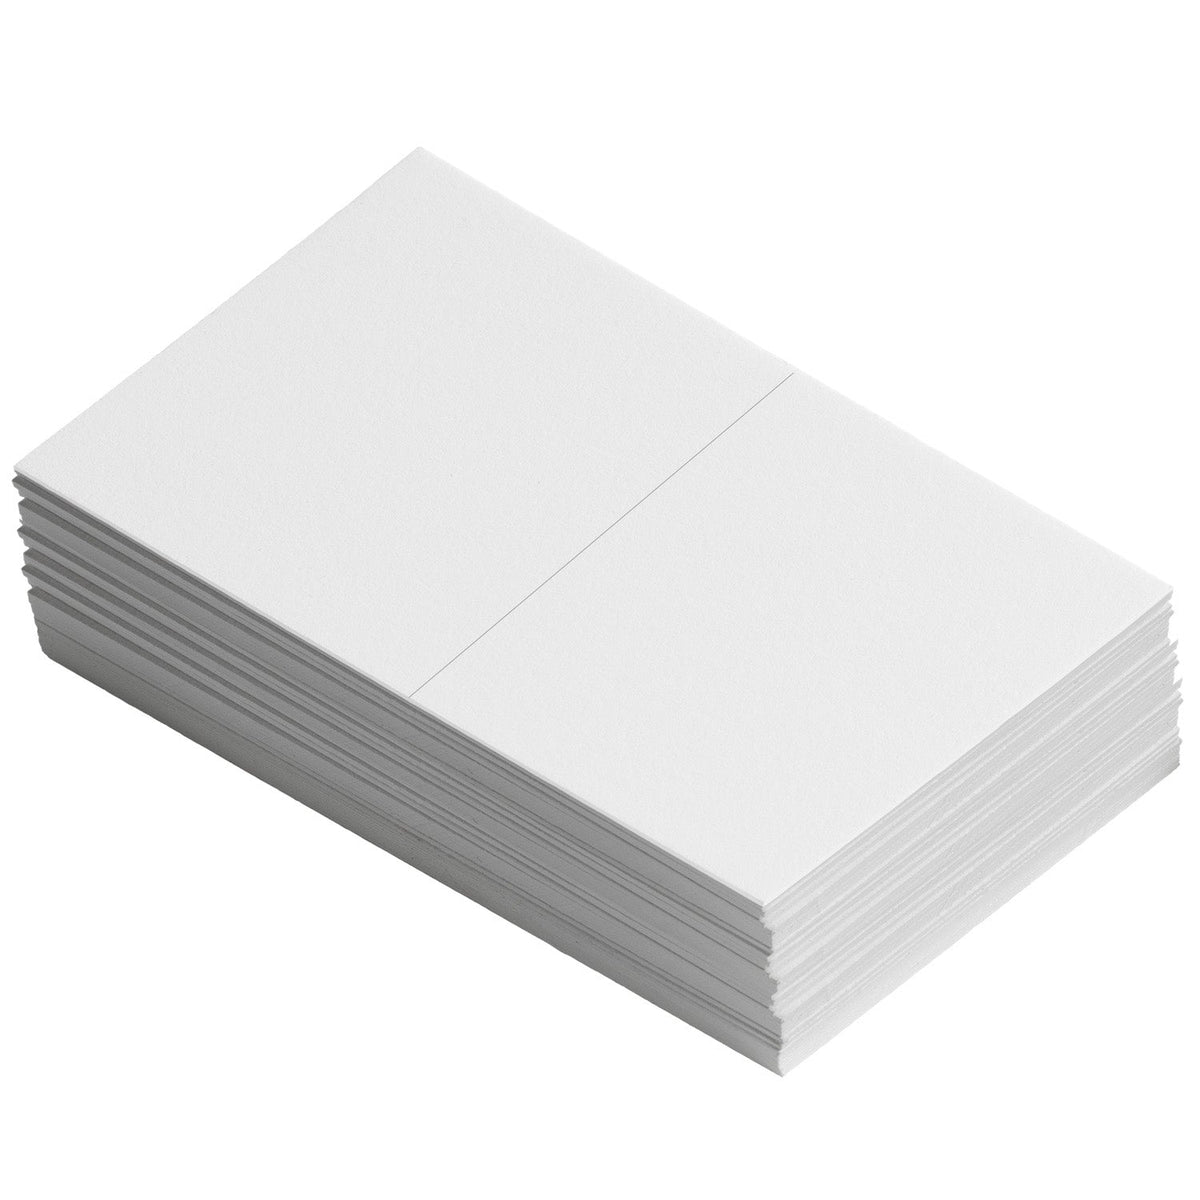 2 in 1 Half Sheet Self Adhesive Labels for Laser Ink Jet Printers - 4000 Pieces